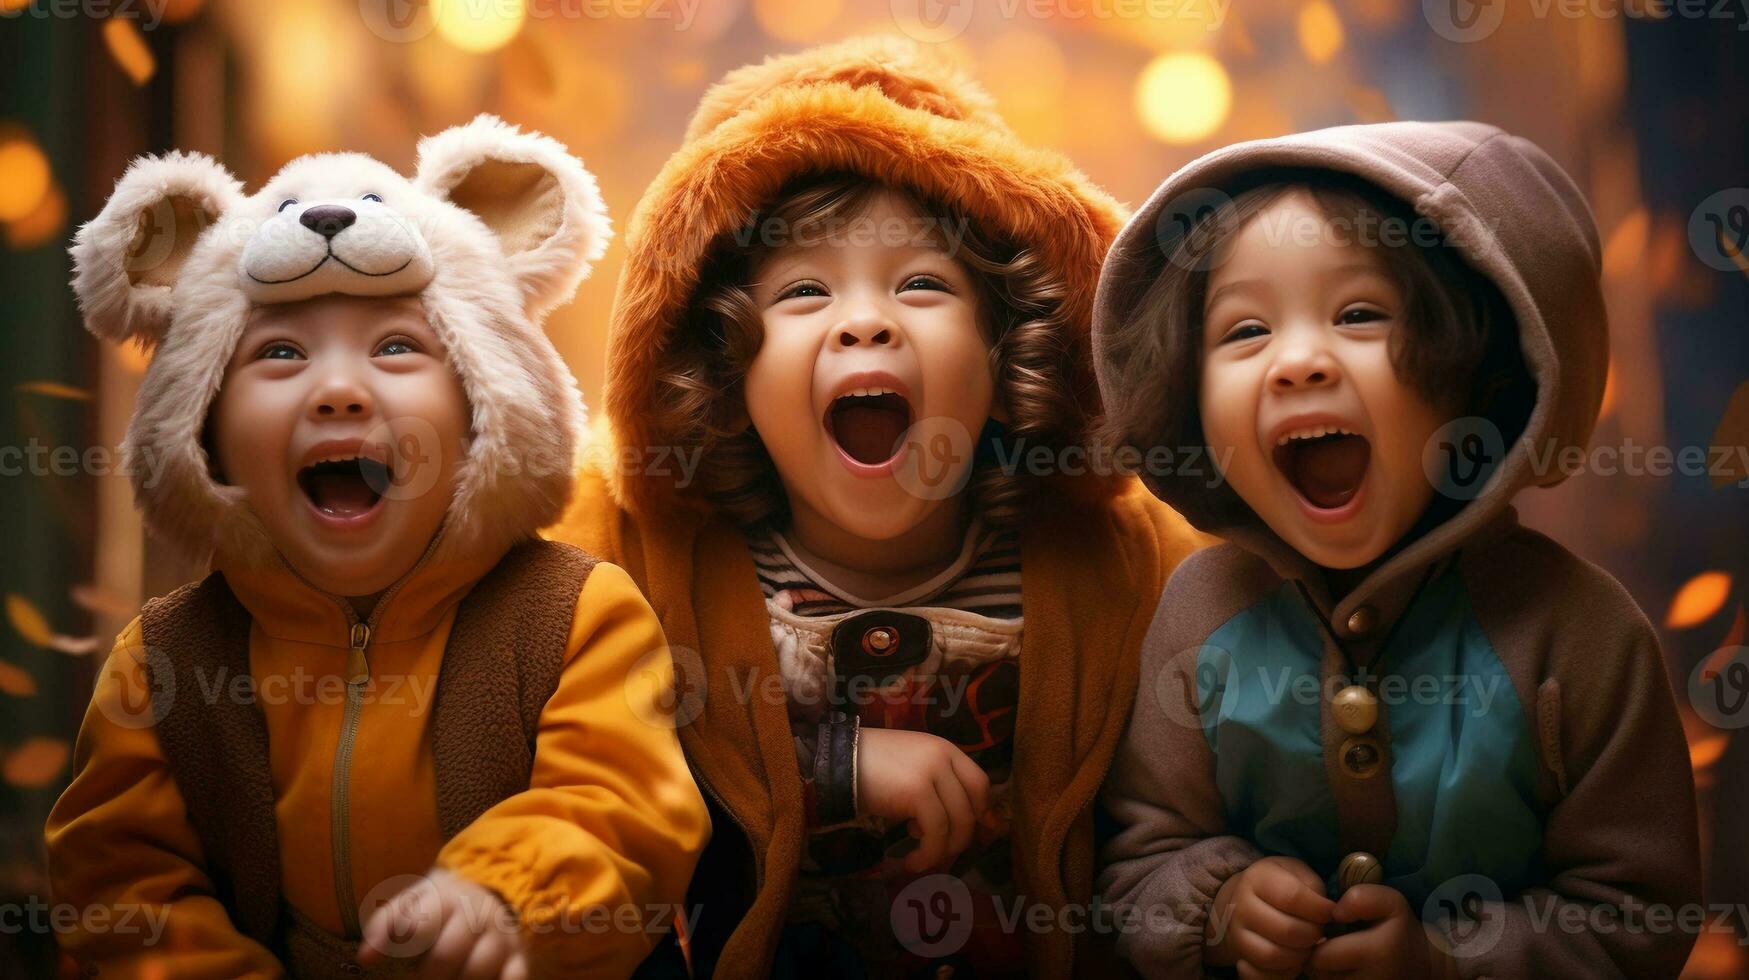 Adorable Kids in a Bright Halloween Scene Wearing Various Costumes. Perfect for Festive Celebrations photo